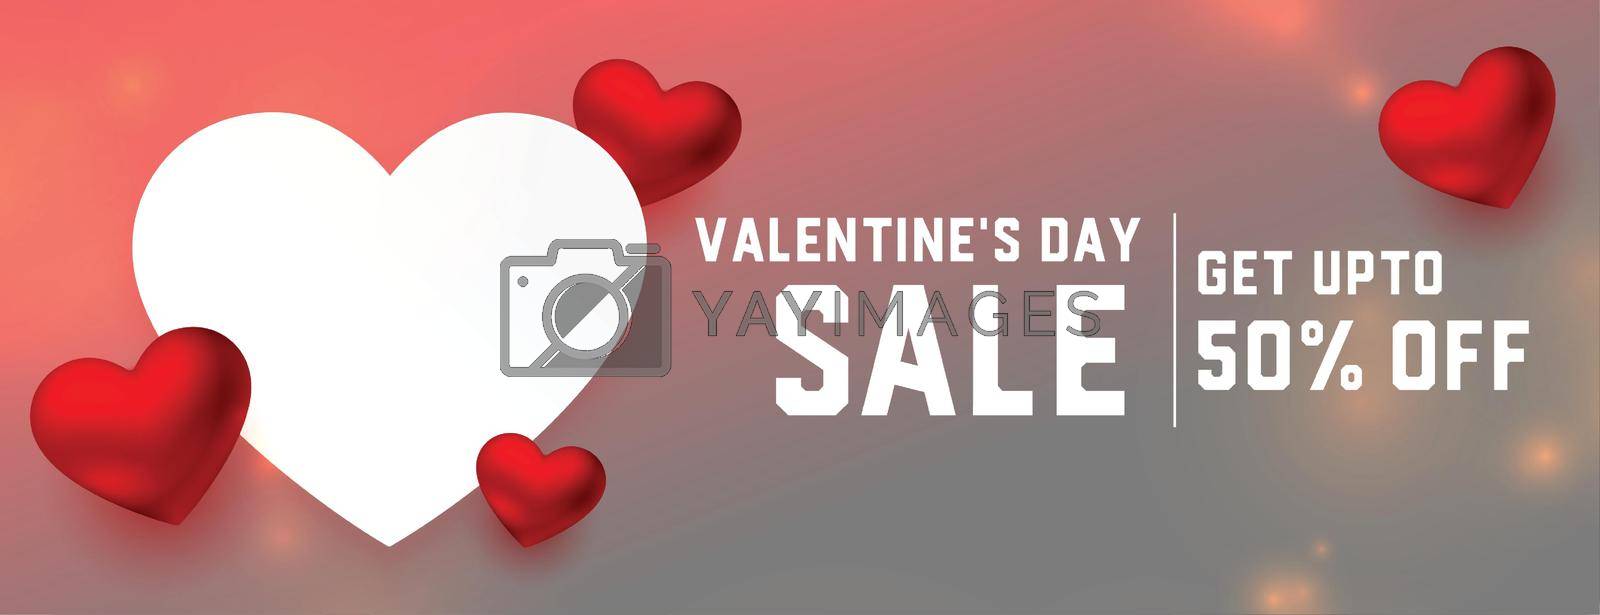 valentines day celebration discount and sale banner